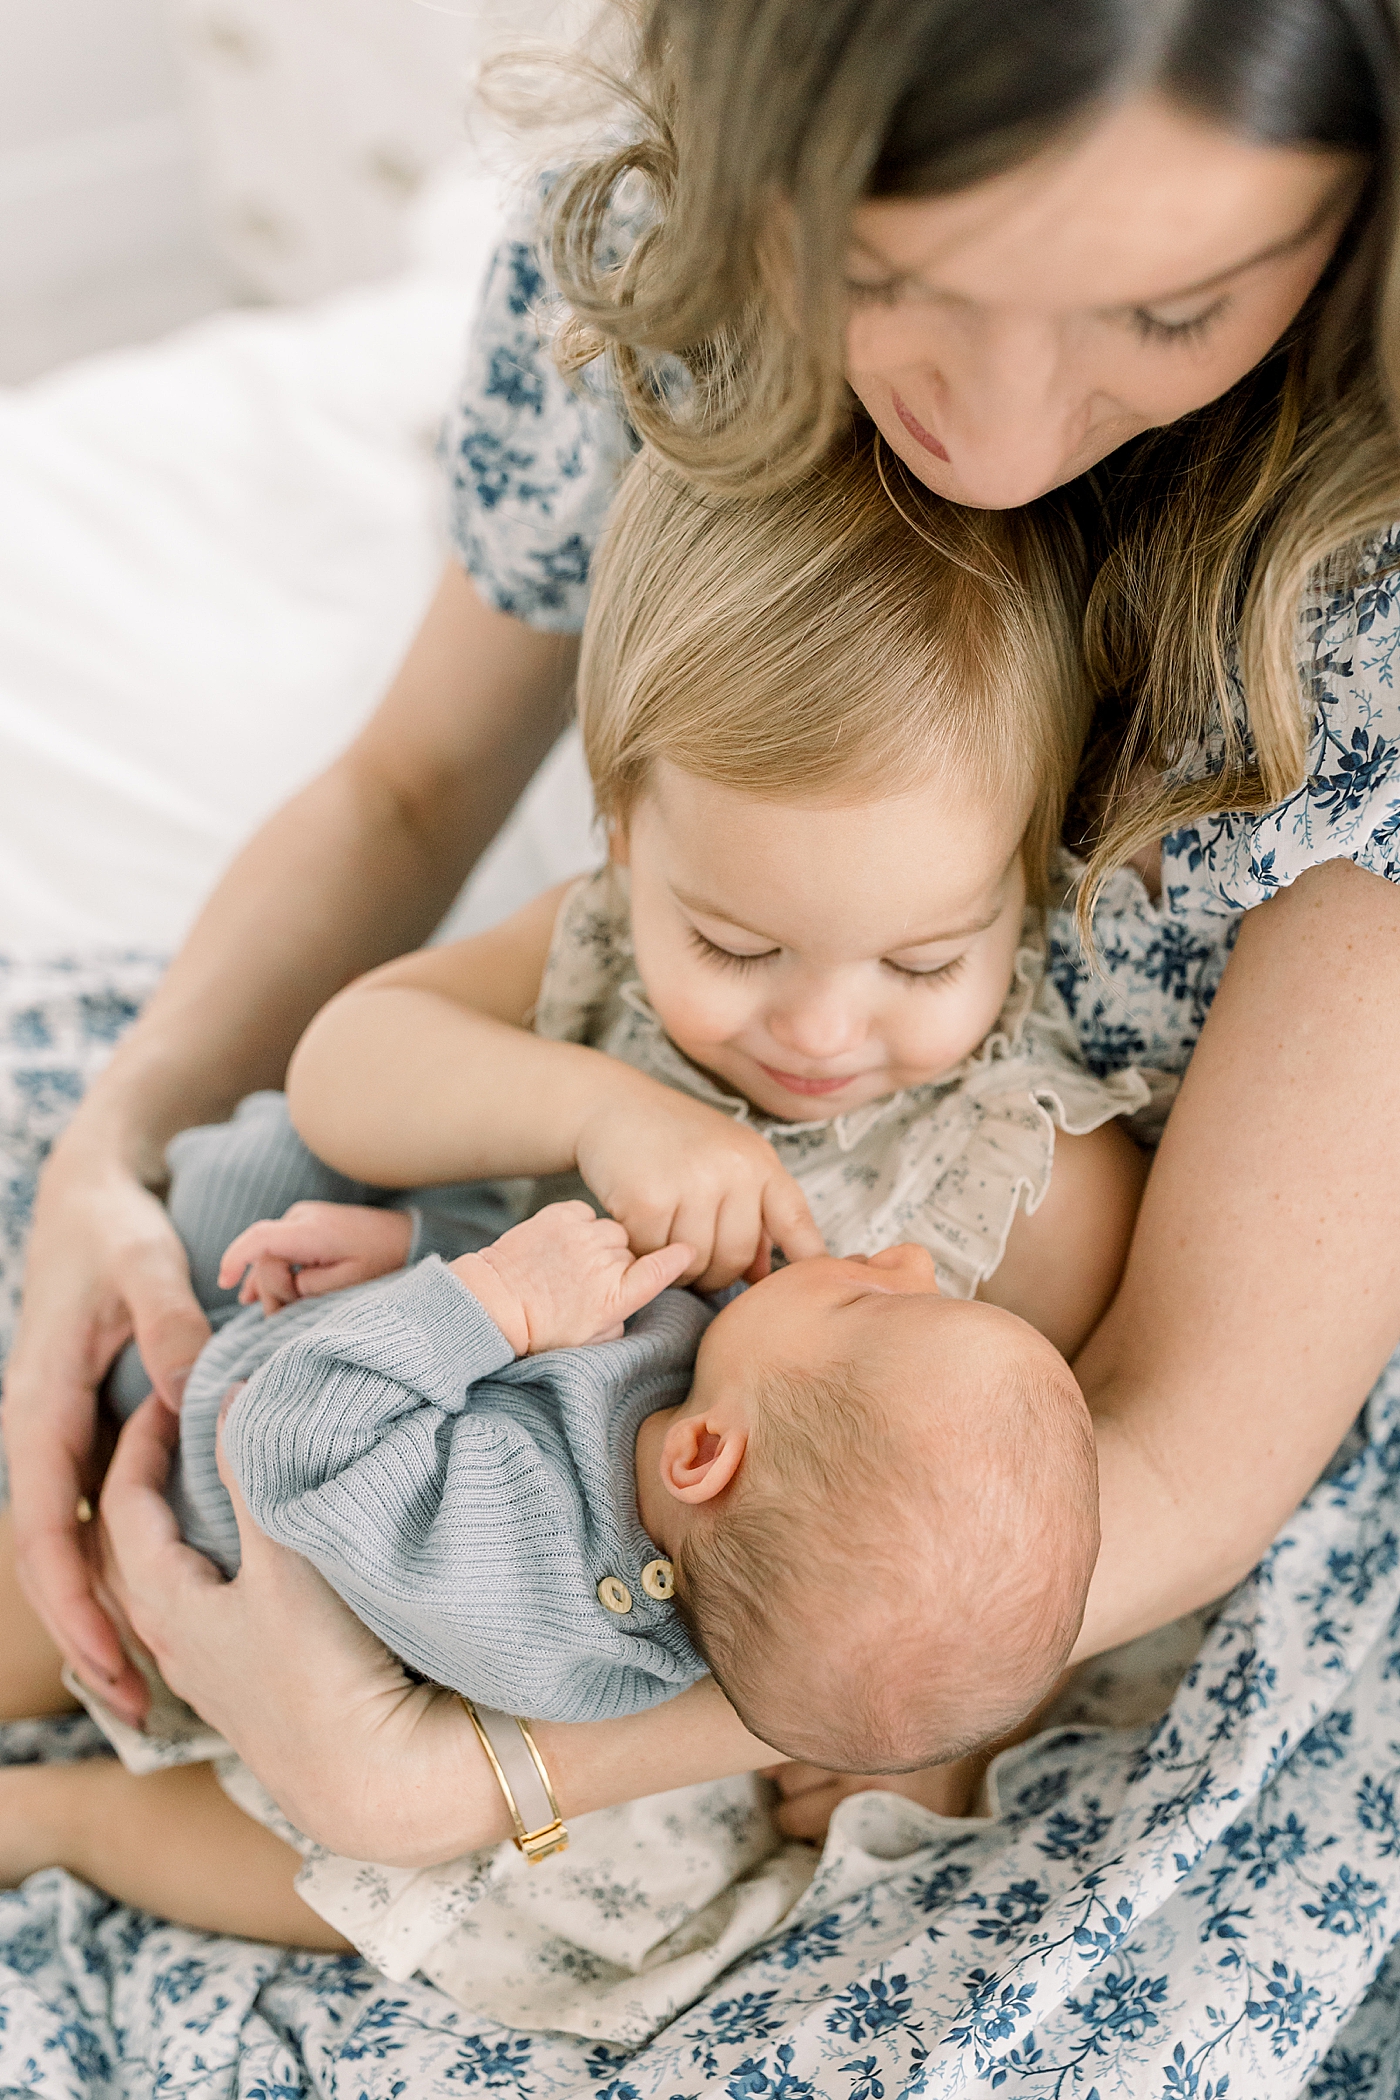 during their In-Home Lifestyle Newborn Session | Image by Caitlyn Motycka 